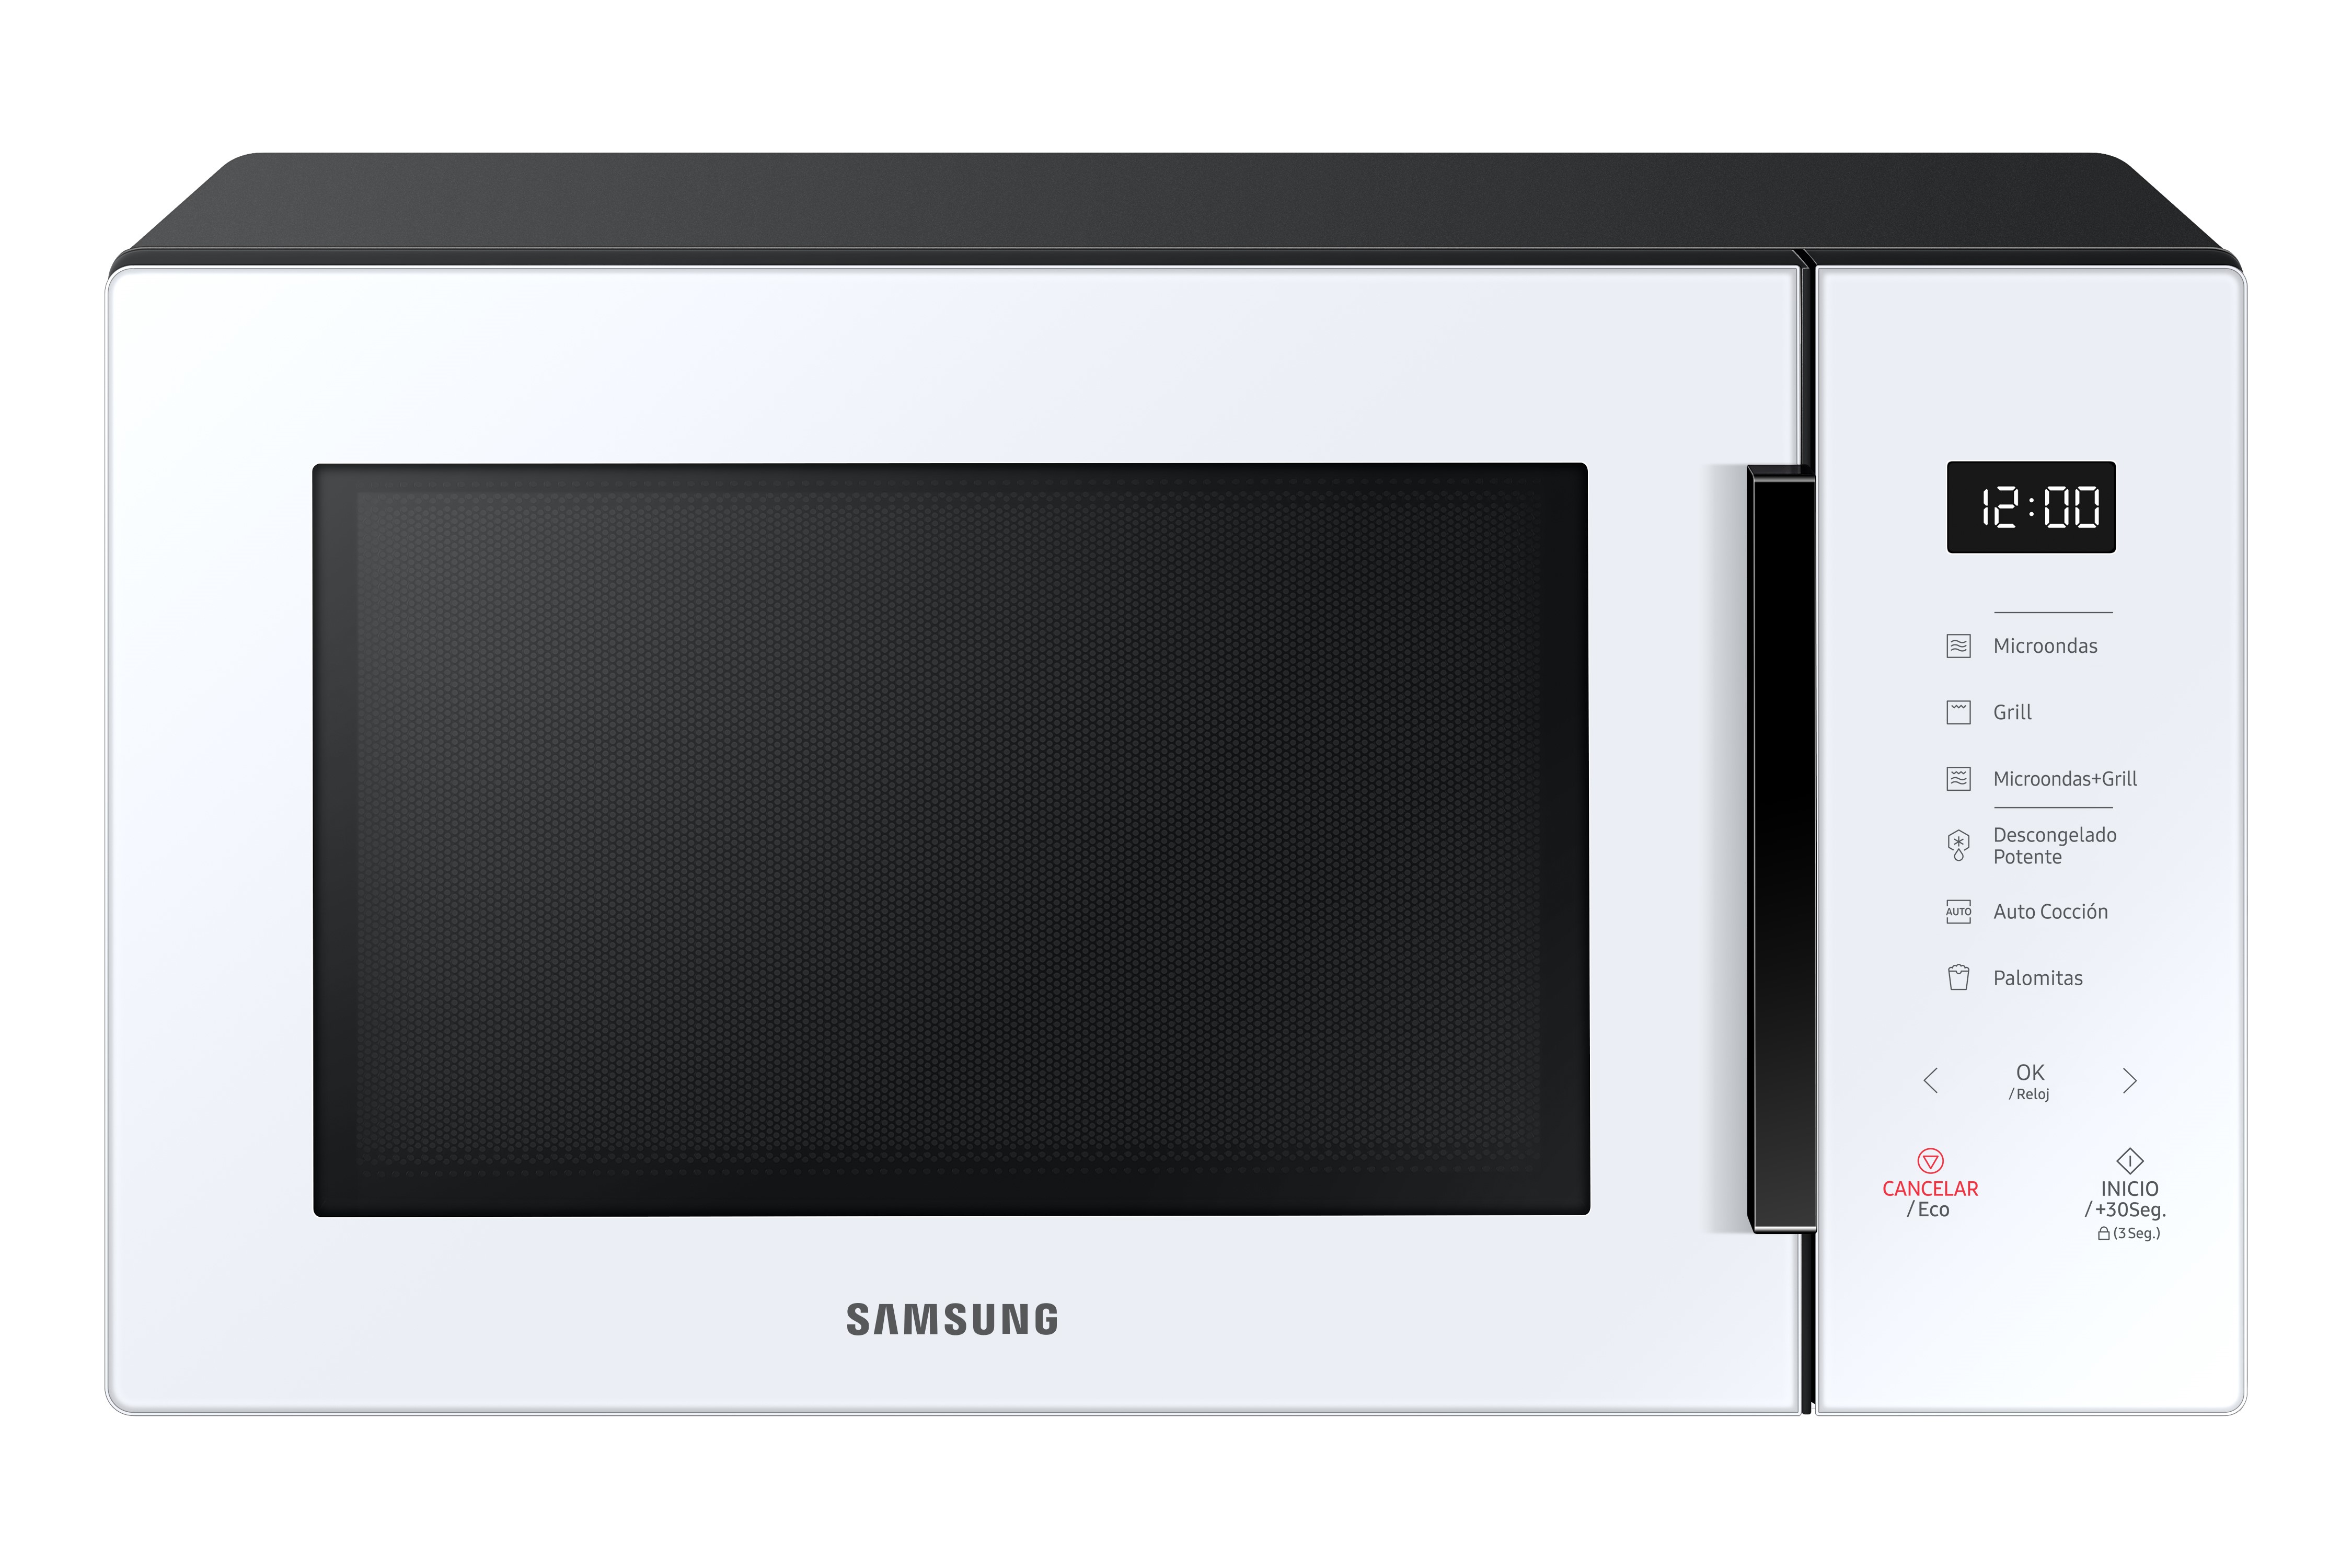 Samsung 30L Bespoke Grill Microwave Oven - White